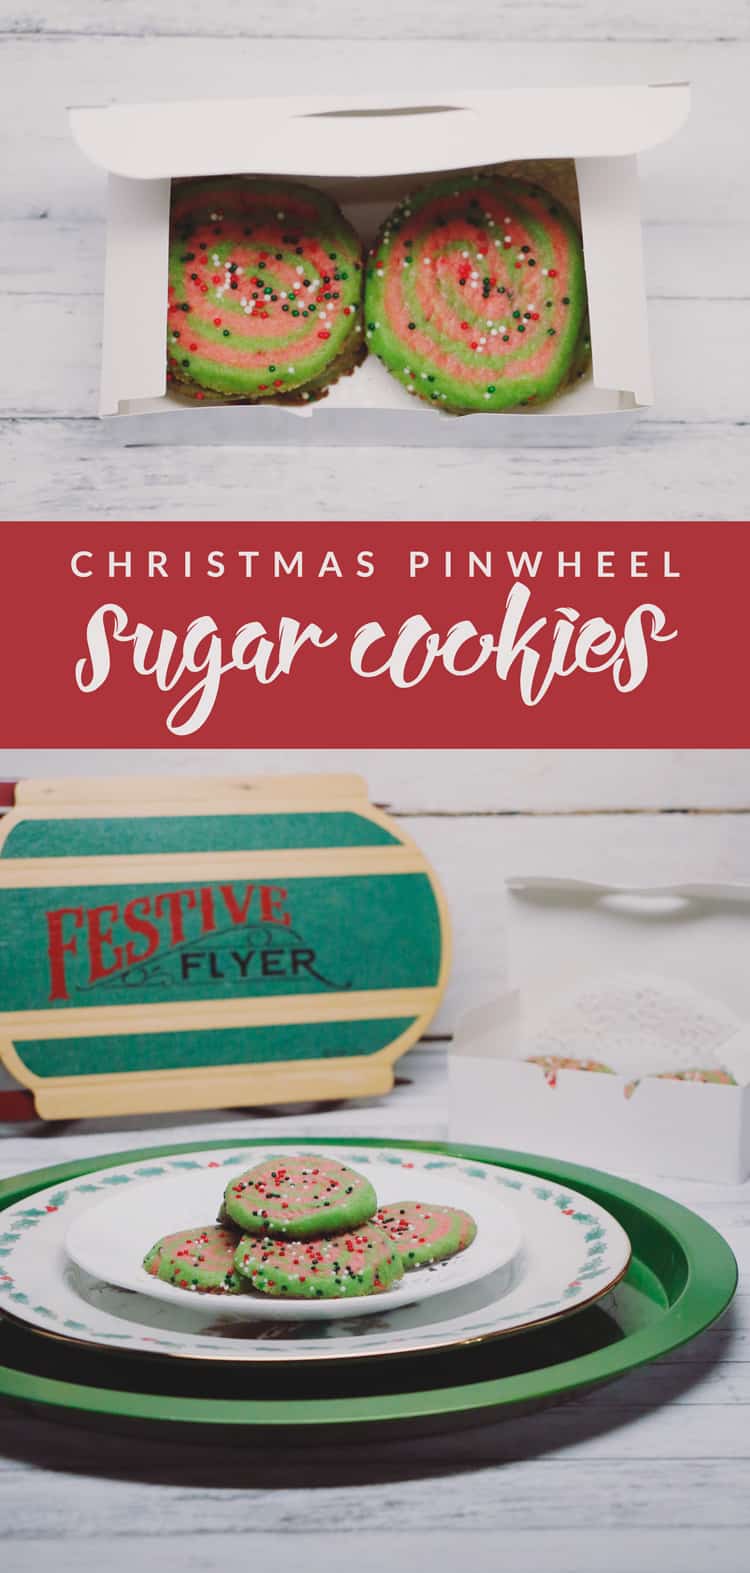 Sugar cookies don't have to be boring! This Pinwheel Sugar Cookie Recipe is perfect for the holidays and spreading a little bit of cheer!